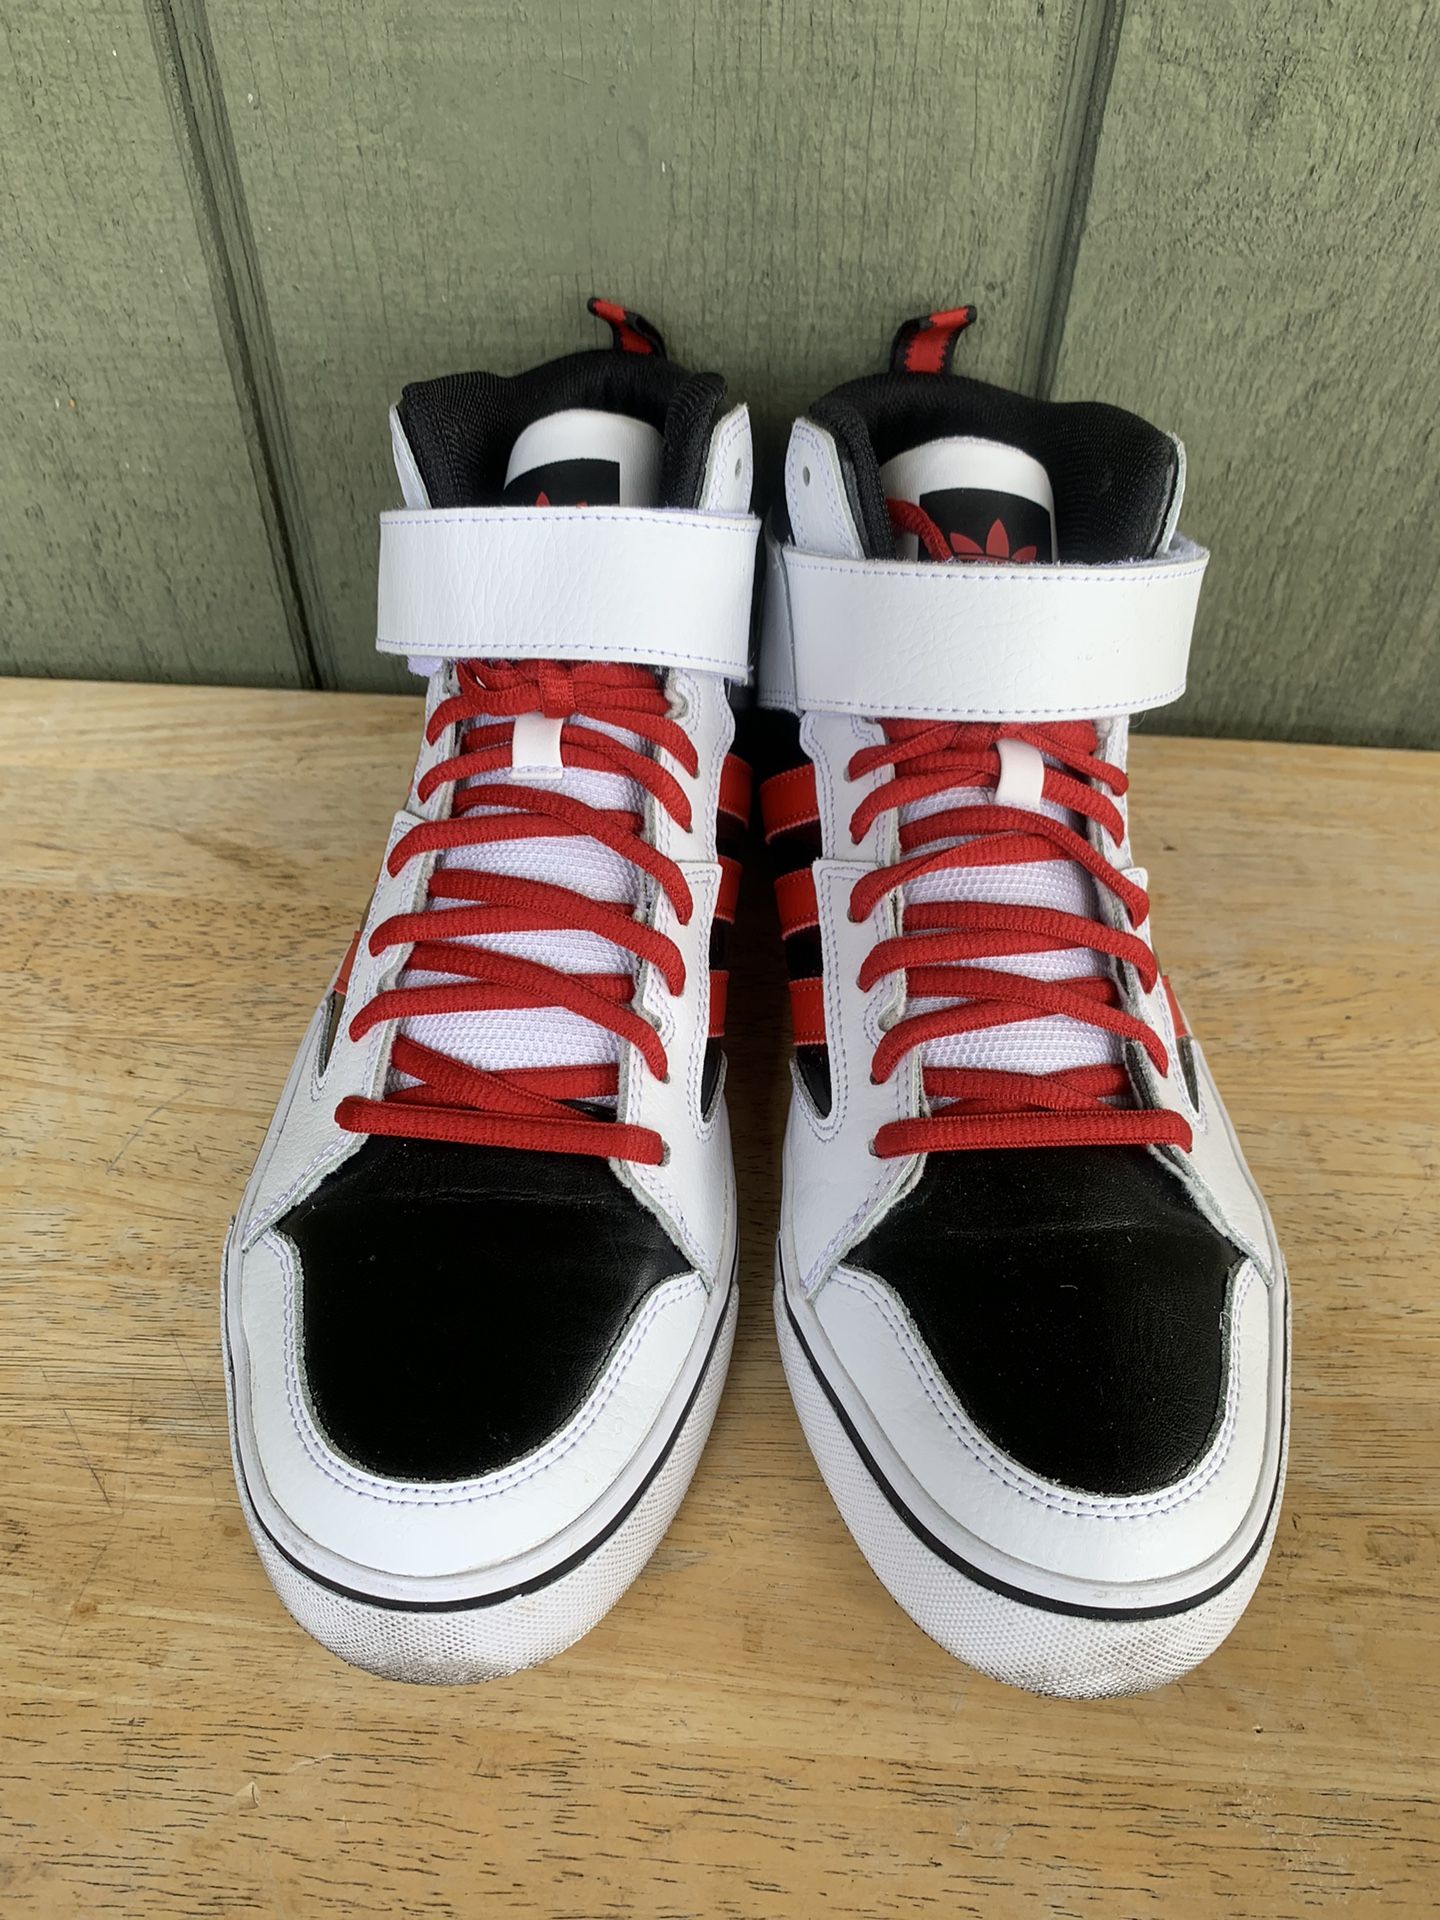 Andes steno Academie Rare Men's Size 9.5 Adidas Varial II Mid White/Black/Red Lace Up Athletic  Shoes for Sale in West Covina, CA - OfferUp